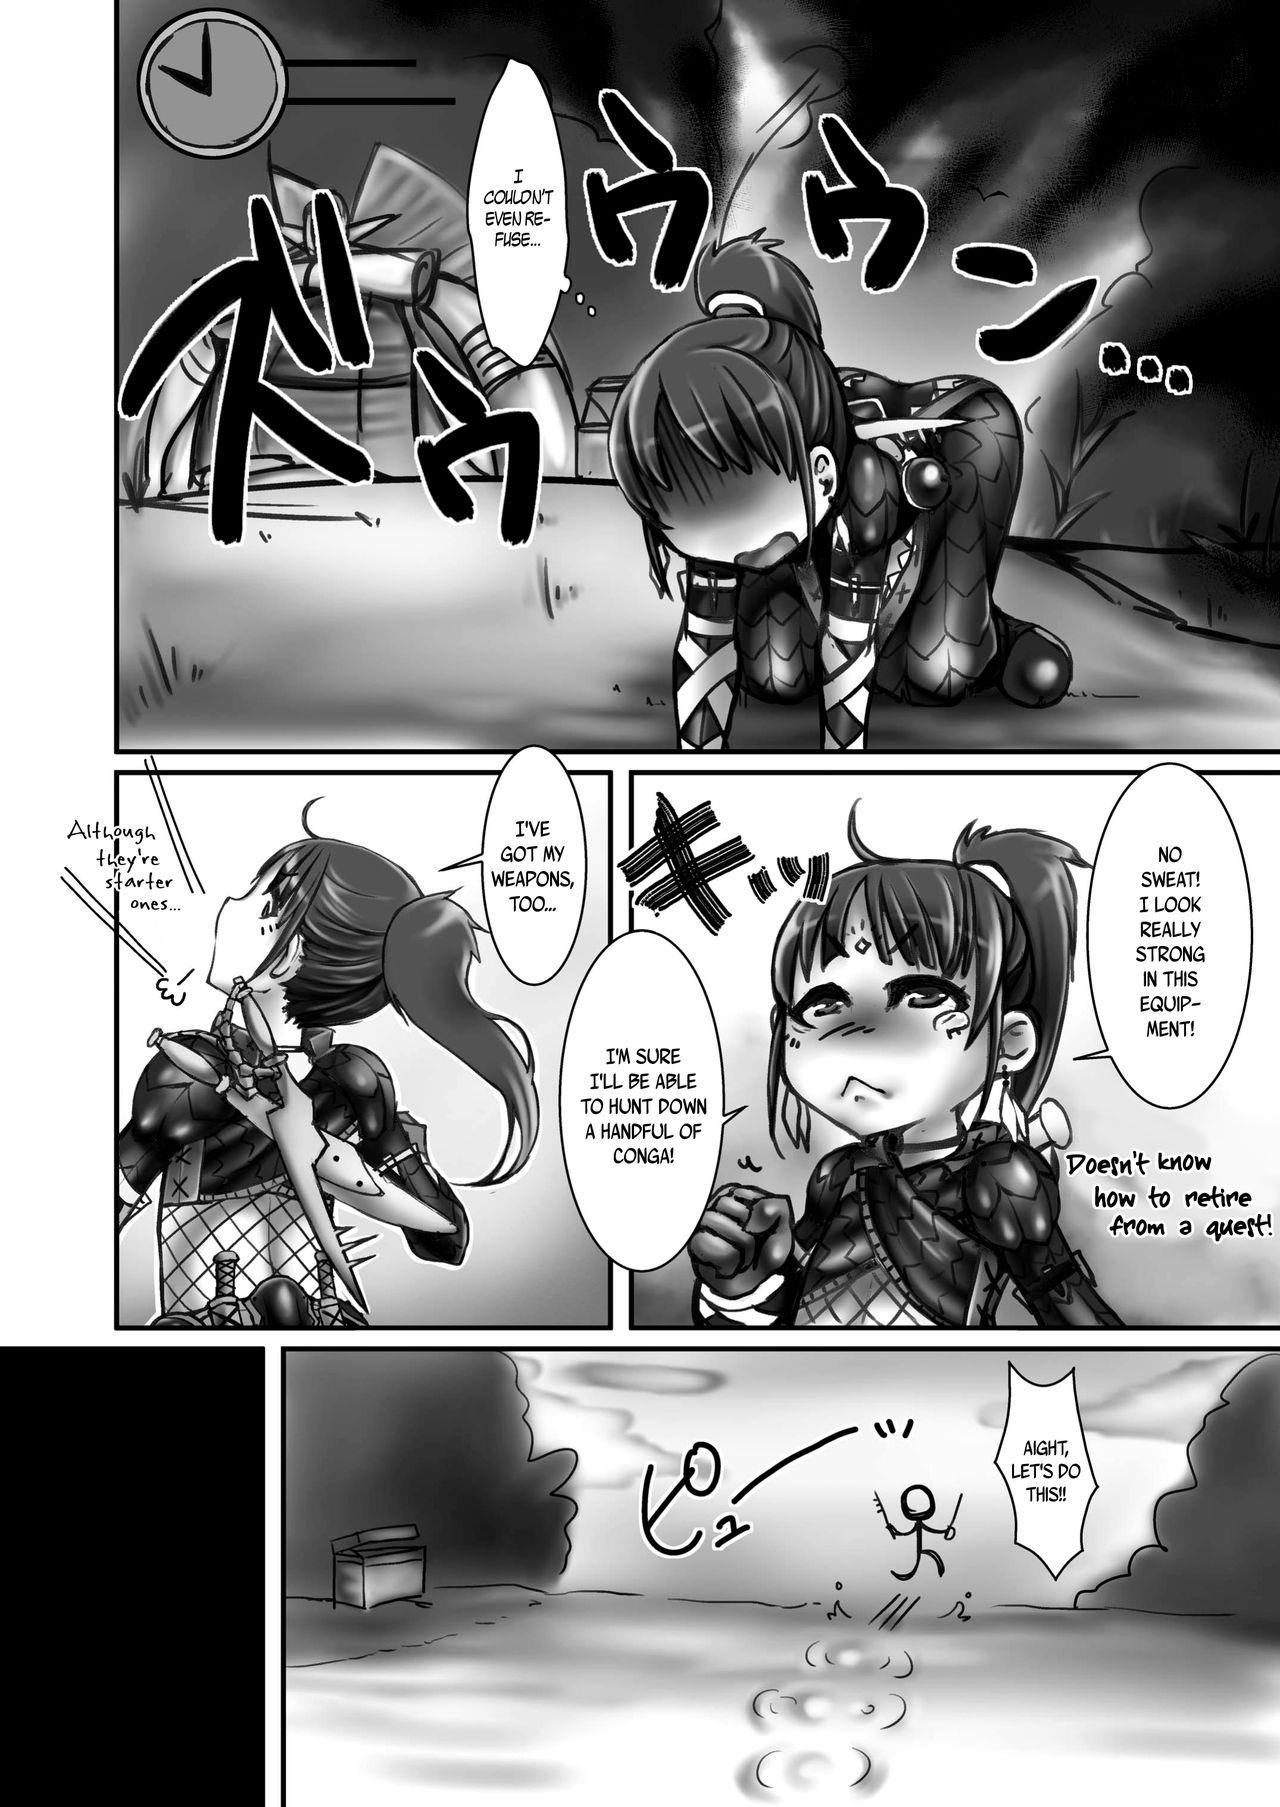 Penetration Kinkue! Hatsujou Kemonotachi wo Kare! | URGENT QUEST! Hunt Down the Beasts in Heat! - Monster hunter Comendo - Page 6